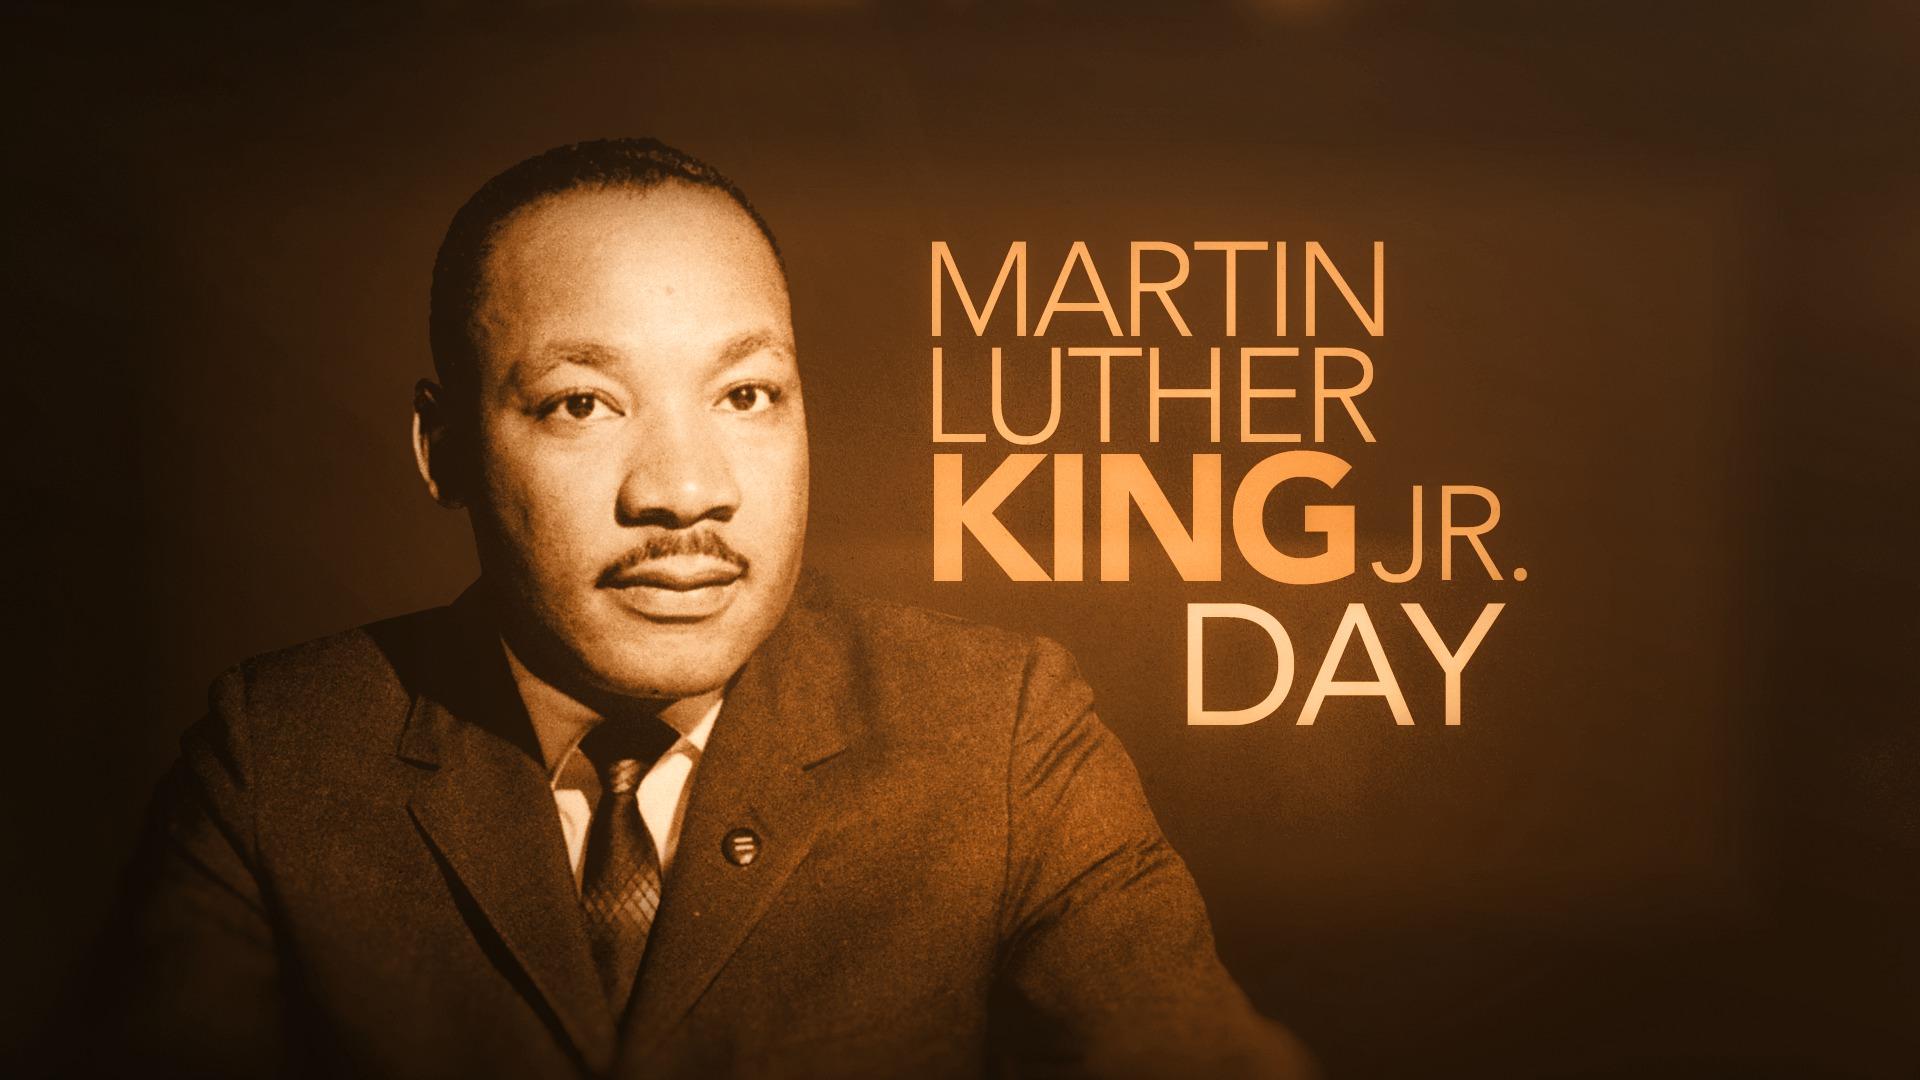 All the ways you can make a difference this MLK Day